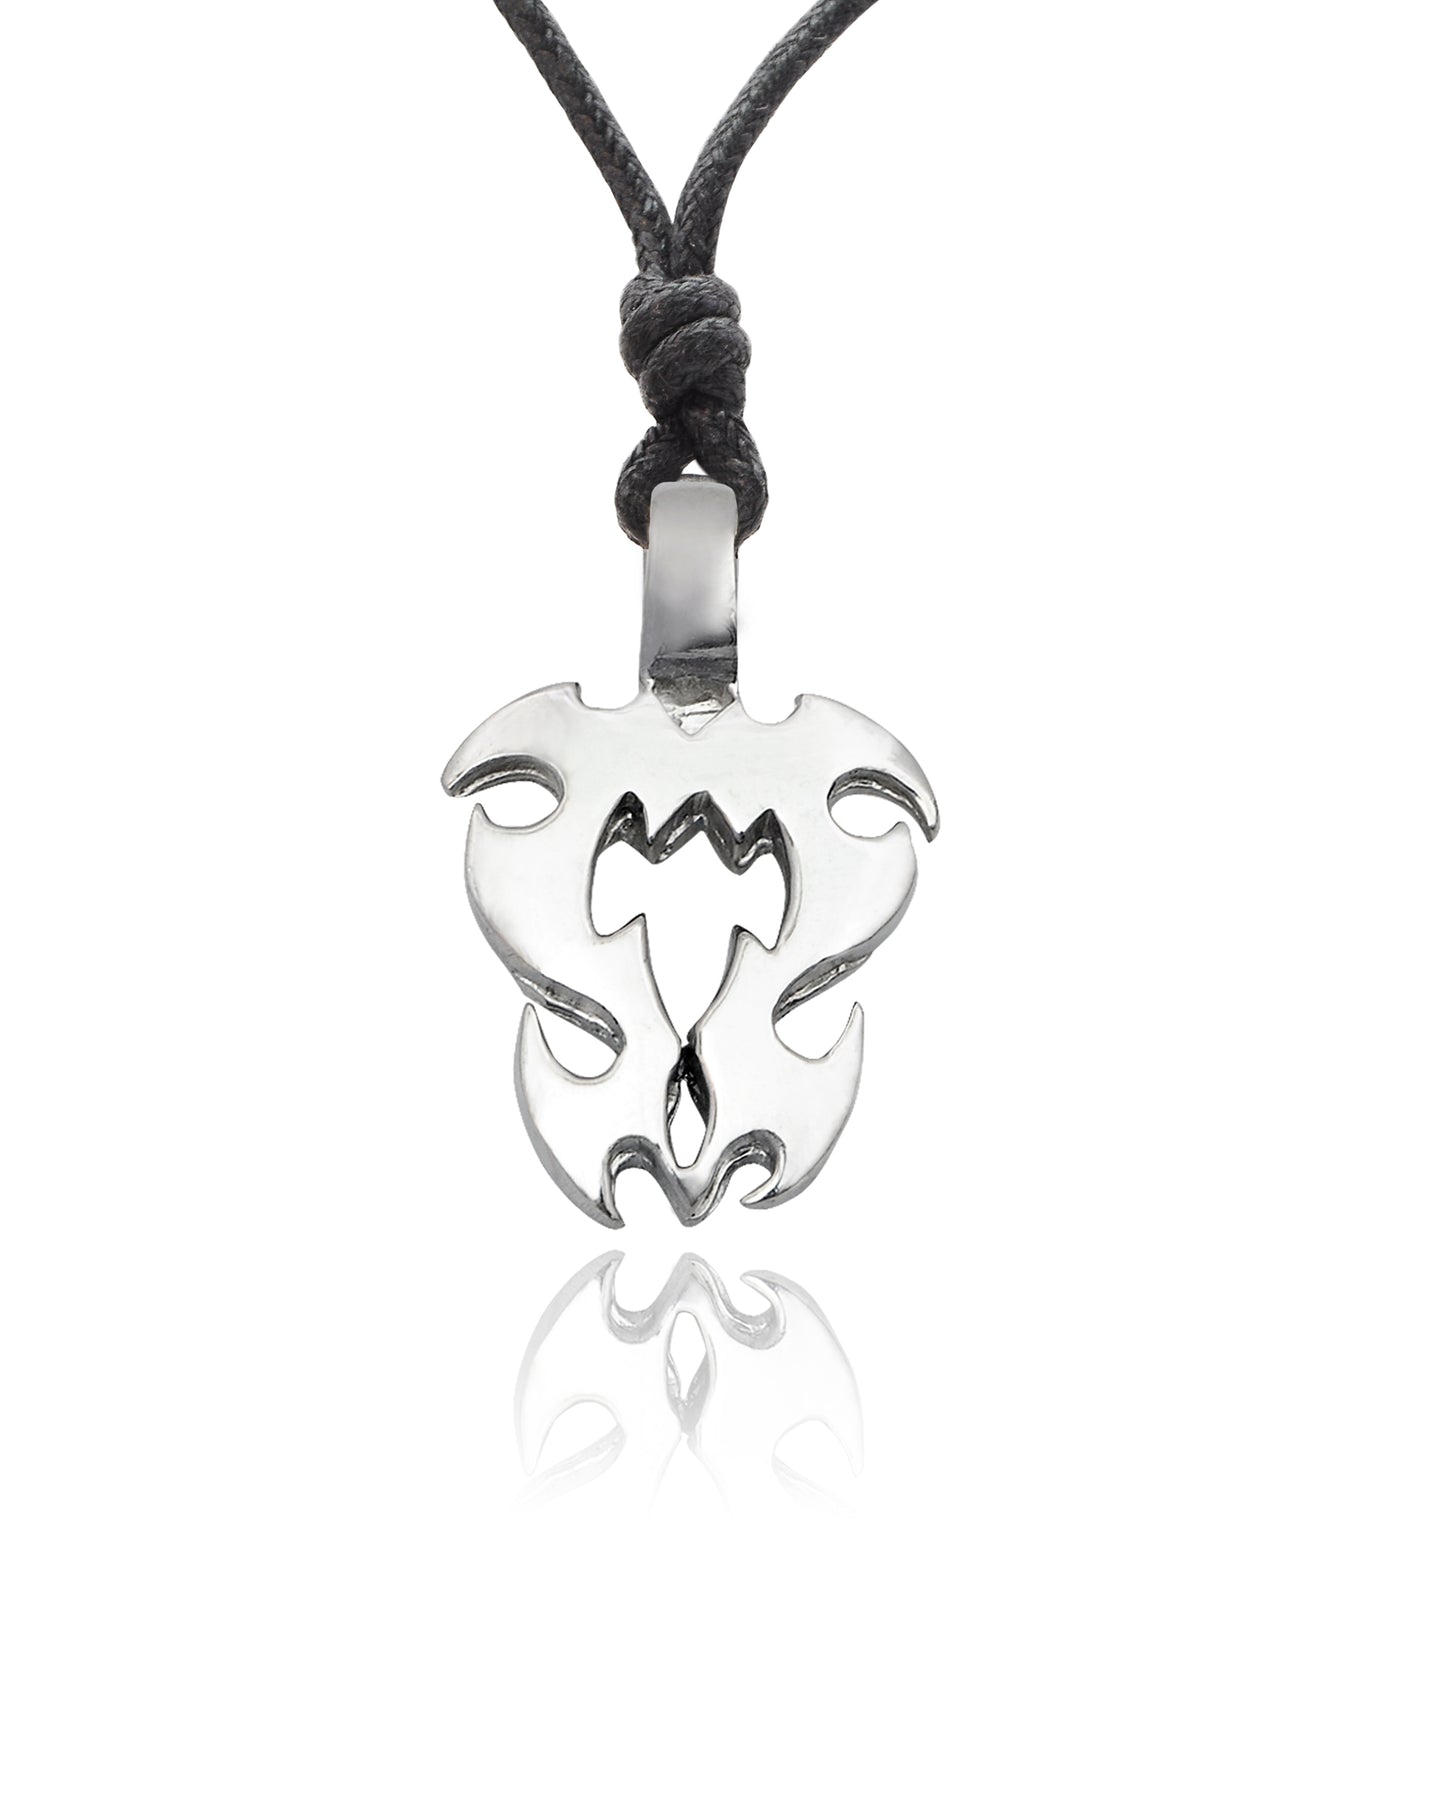 Abstract Art Design Silver Pewter Charm Necklace Pendant Jewelry